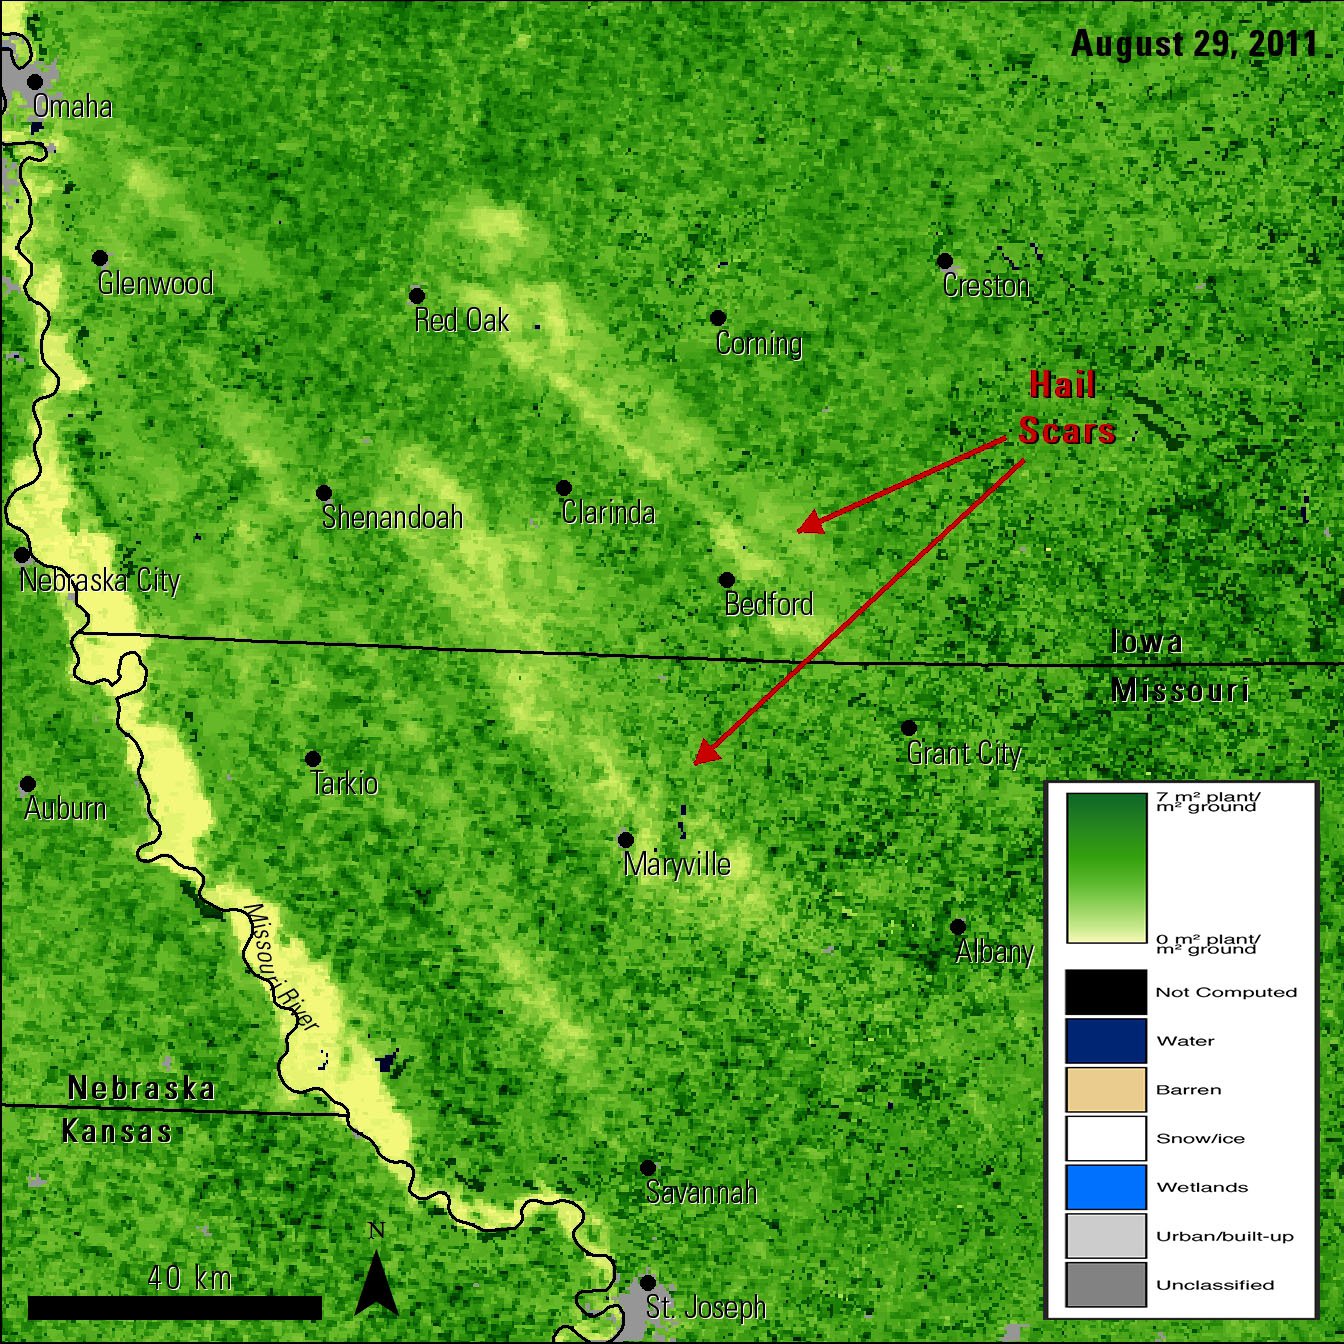 Terra and Aqua Combined MODIS LAI data, acquired on August 29, 2011.